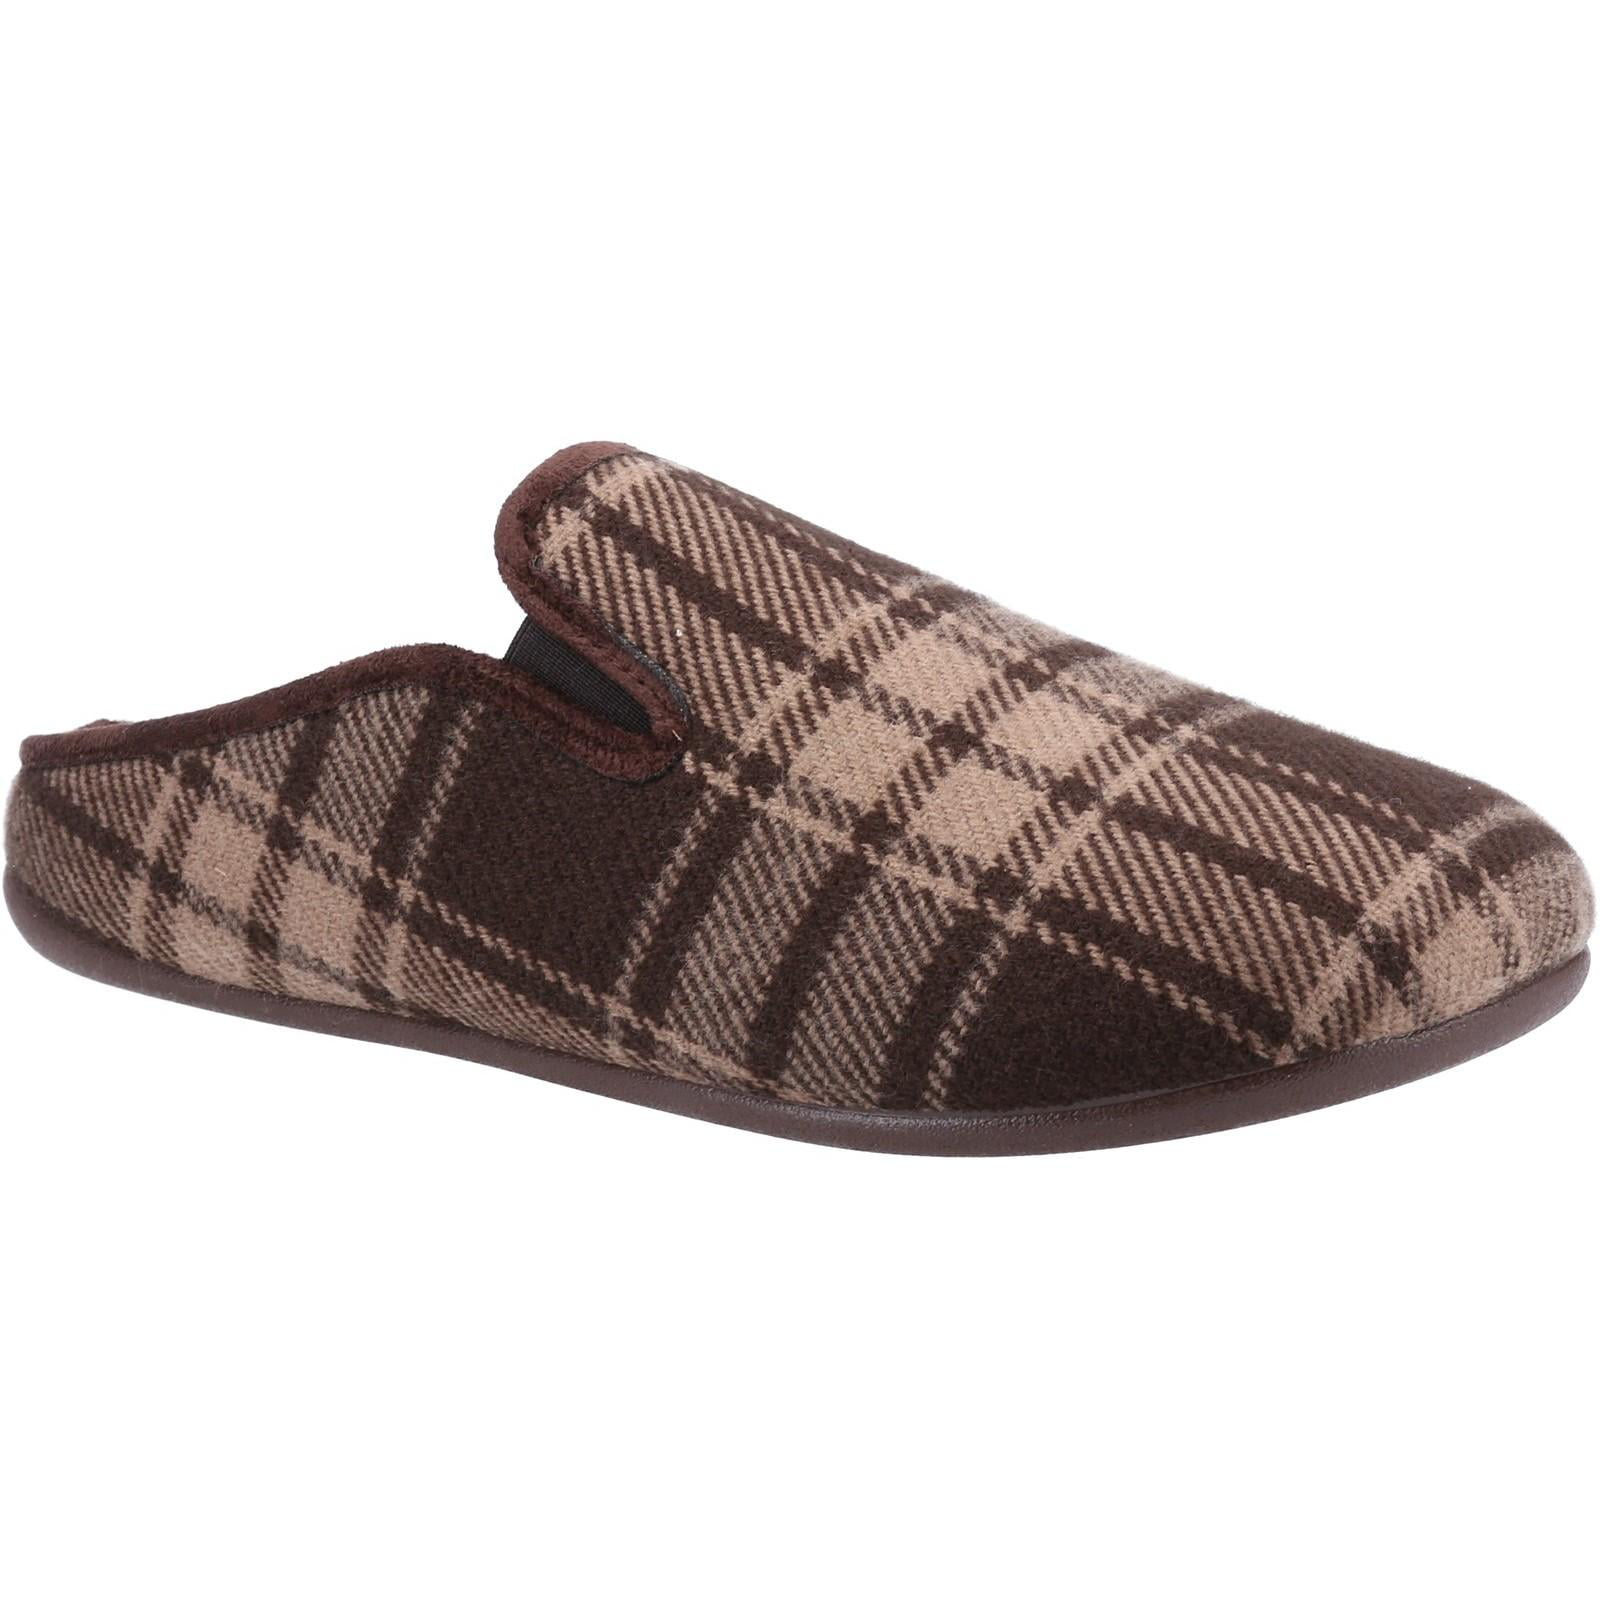 12 MENS SLEEPERS FRAZER BROWN WITH LION MOTIF TWIN GUSSET SLIPPERS.7,9,11 